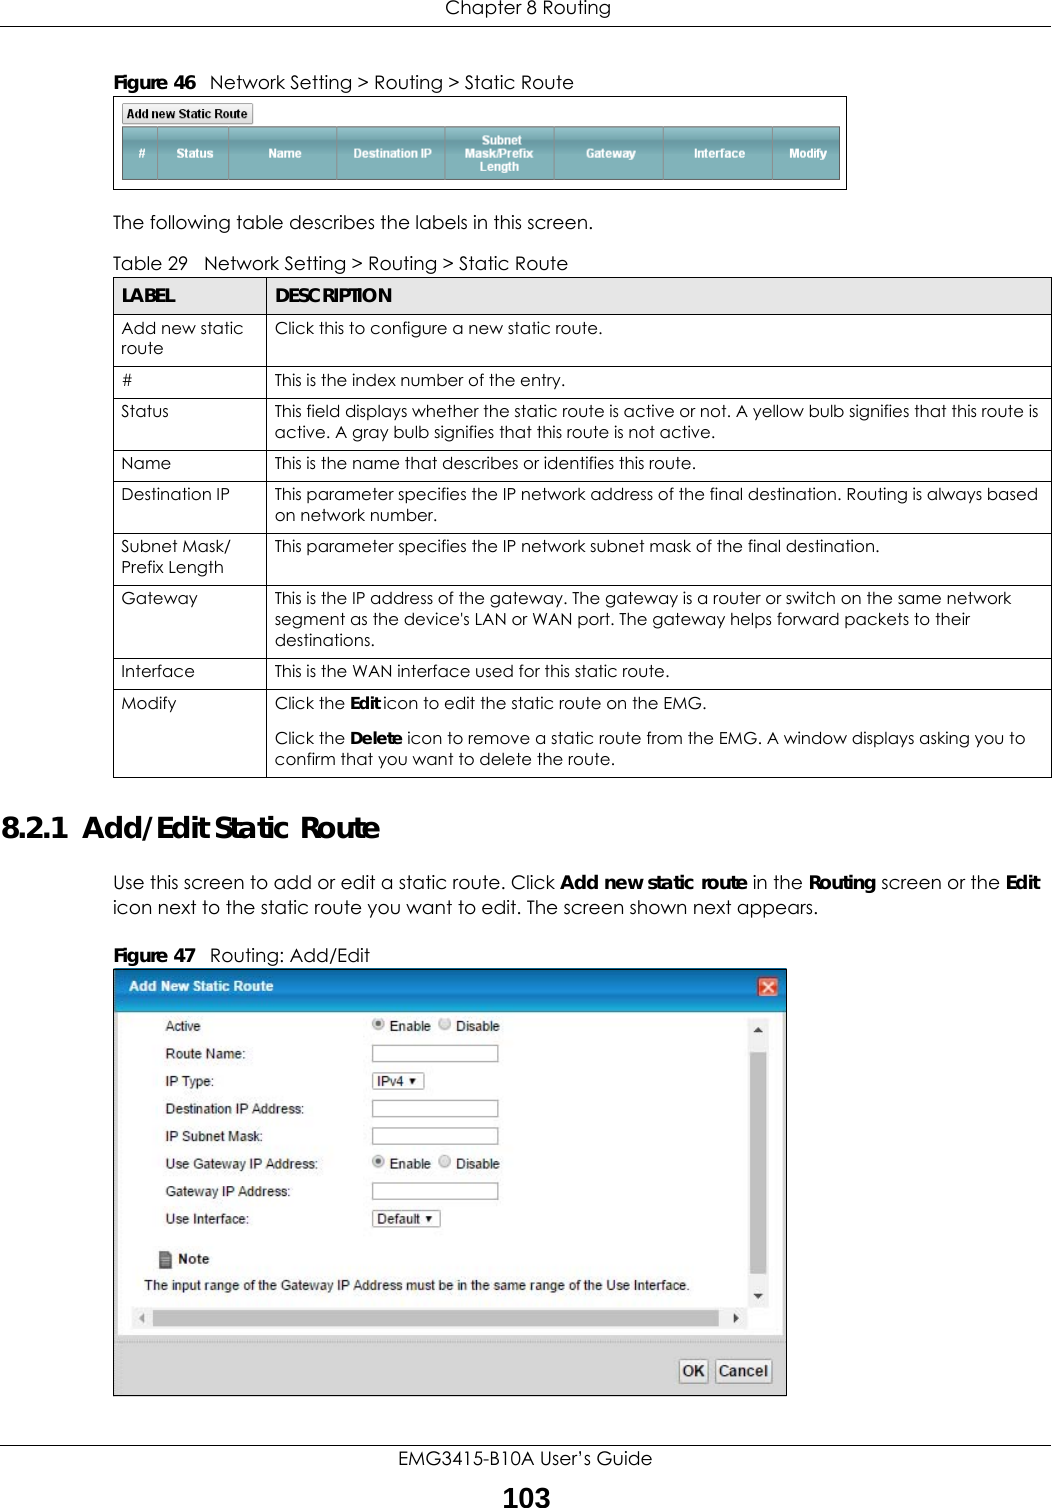  Chapter 8 RoutingEMG3415-B10A User’s Guide103Figure 46   Network Setting &gt; Routing &gt; Static RouteThe following table describes the labels in this screen. 8.2.1  Add/Edit Static Route Use this screen to add or edit a static route. Click Add new static route in the Routing screen or the Edit icon next to the static route you want to edit. The screen shown next appears.Figure 47   Routing: Add/EditTable 29   Network Setting &gt; Routing &gt; Static RouteLABEL DESCRIPTIONAdd new static routeClick this to configure a new static route.#This is the index number of the entry.Status This field displays whether the static route is active or not. A yellow bulb signifies that this route is active. A gray bulb signifies that this route is not active.Name This is the name that describes or identifies this route. Destination IP This parameter specifies the IP network address of the final destination. Routing is always based on network number. Subnet Mask/Prefix LengthThis parameter specifies the IP network subnet mask of the final destination.Gateway This is the IP address of the gateway. The gateway is a router or switch on the same network segment as the device&apos;s LAN or WAN port. The gateway helps forward packets to their destinations.Interface This is the WAN interface used for this static route.Modify Click the Edit icon to edit the static route on the EMG.Click the Delete icon to remove a static route from the EMG. A window displays asking you to confirm that you want to delete the route. 